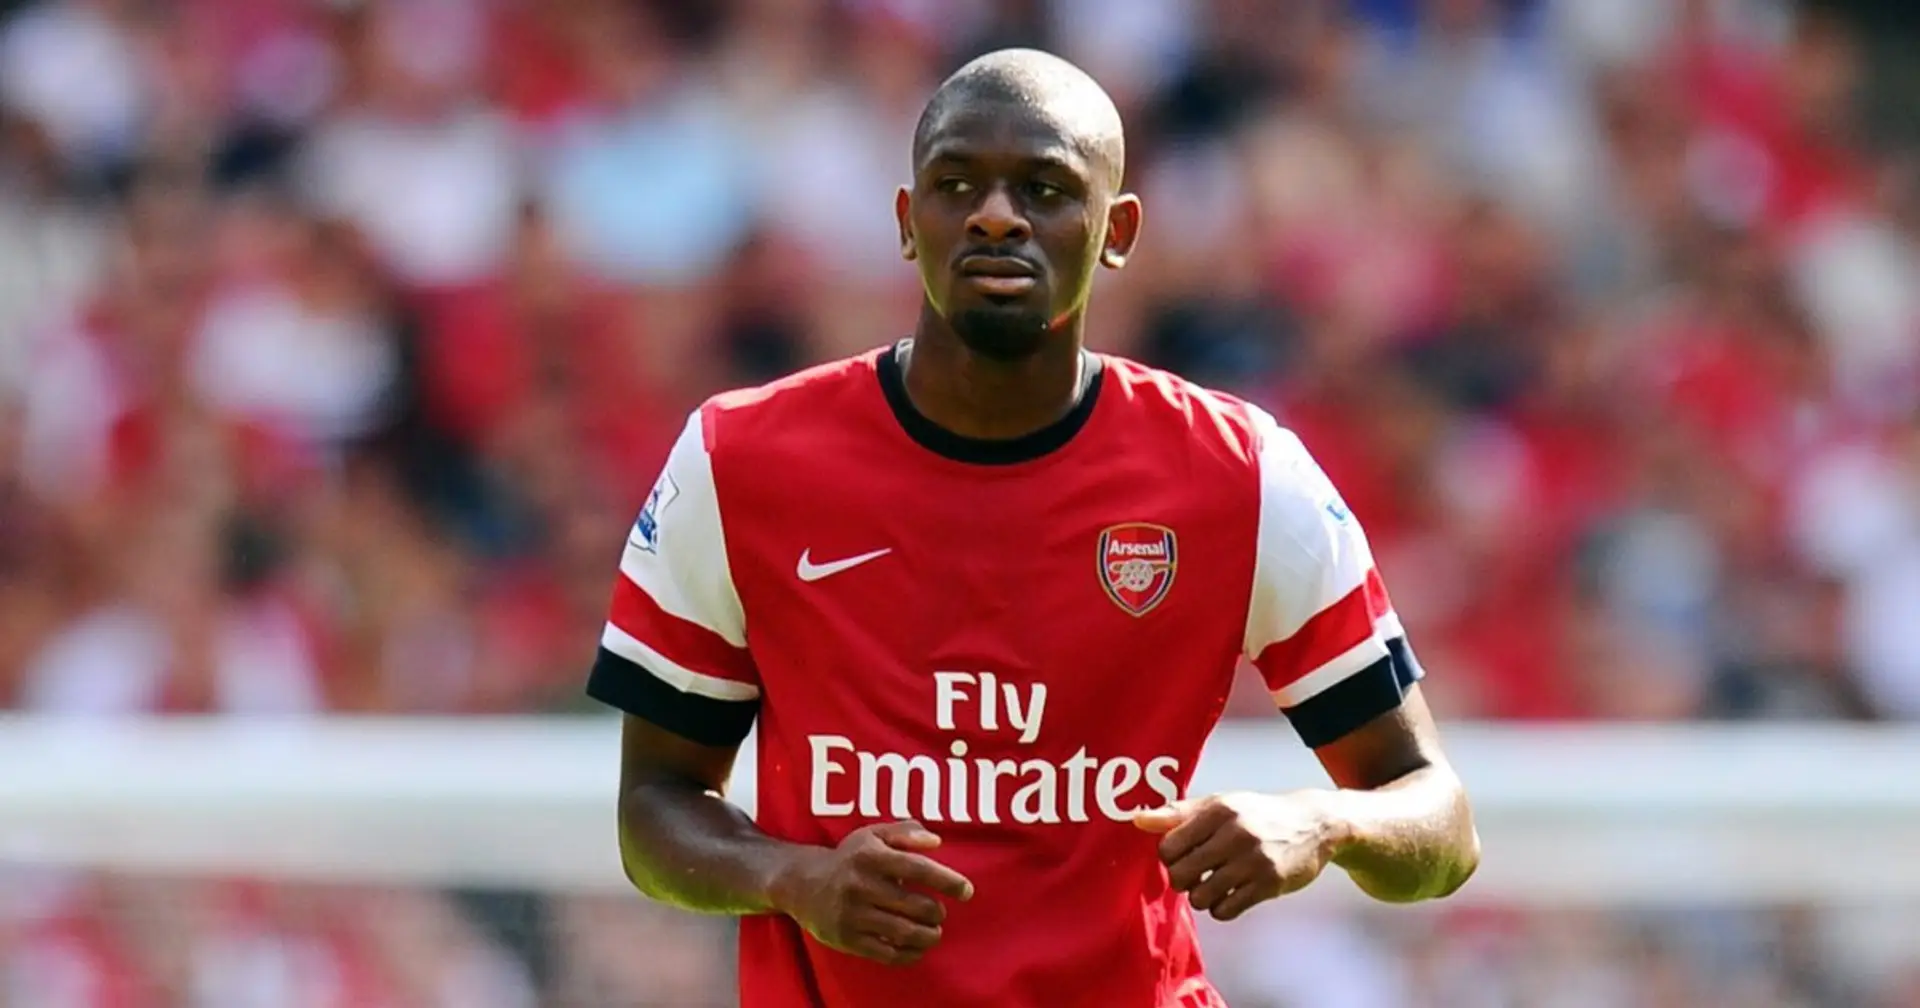 'One of the best I've played with': ex-Arsenal man Clichy picks Abou Diaby as the standout Gunner